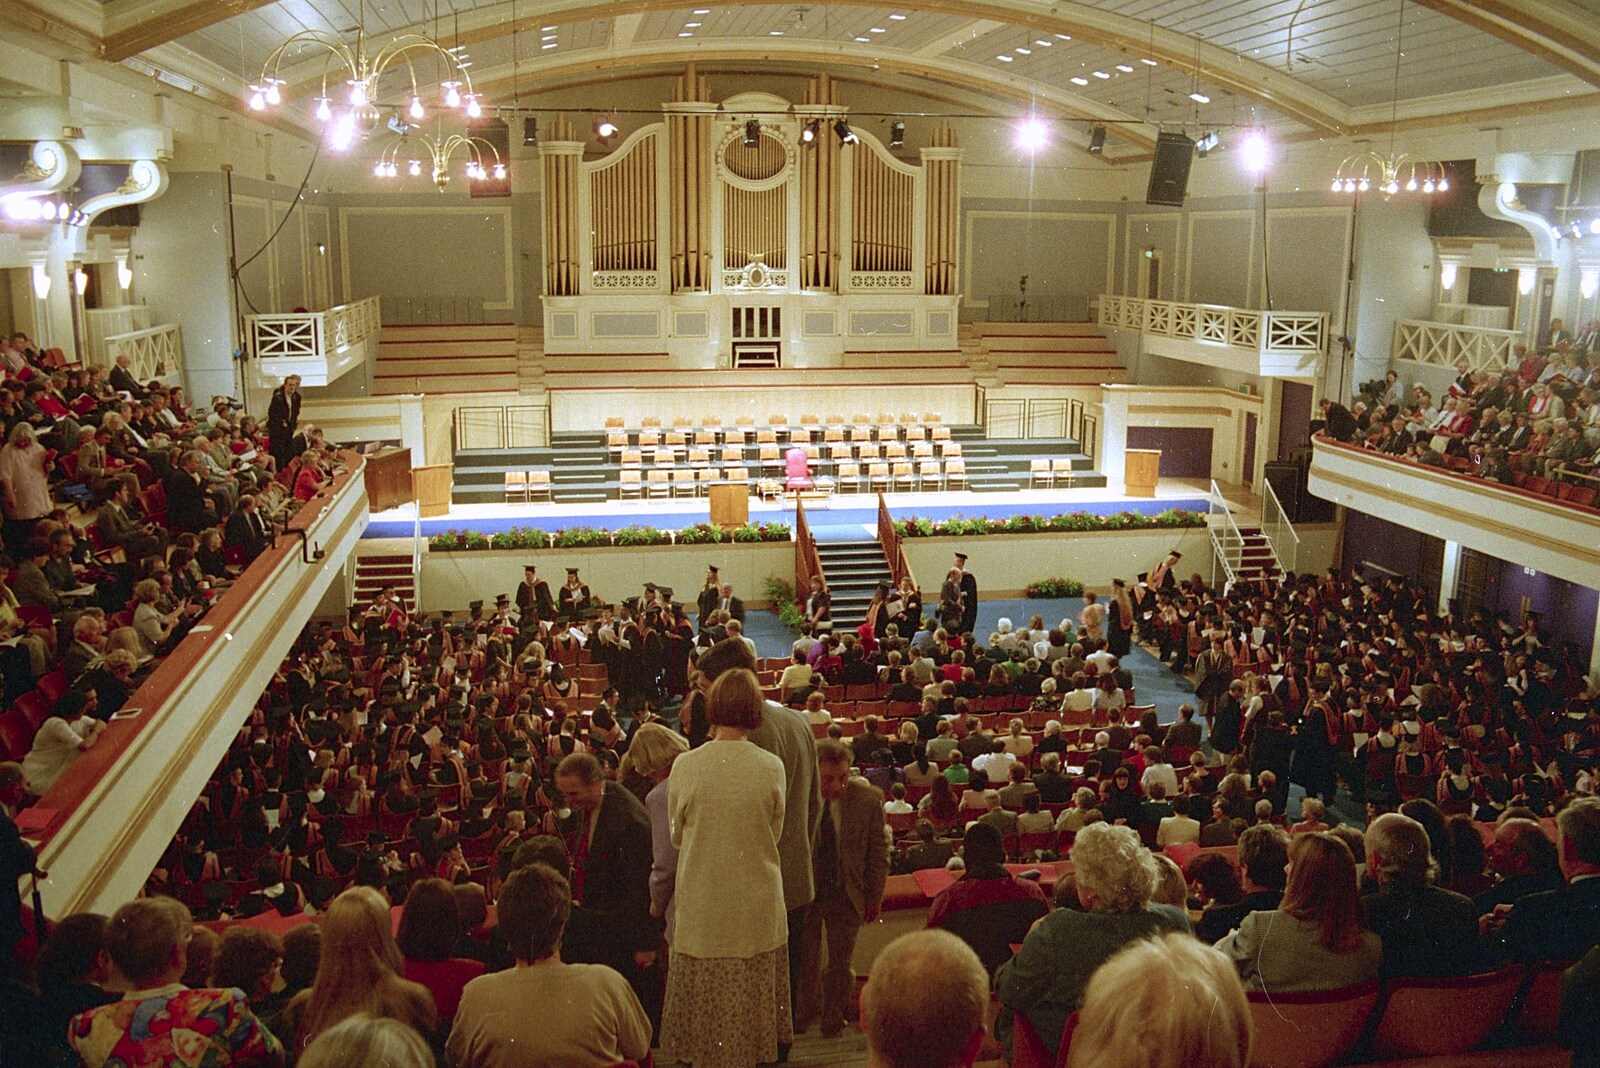 Sis Graduates from De Montfort, Leicester, Leicestershire - 9th August 1997: De Montfort Hall waits as the students file in